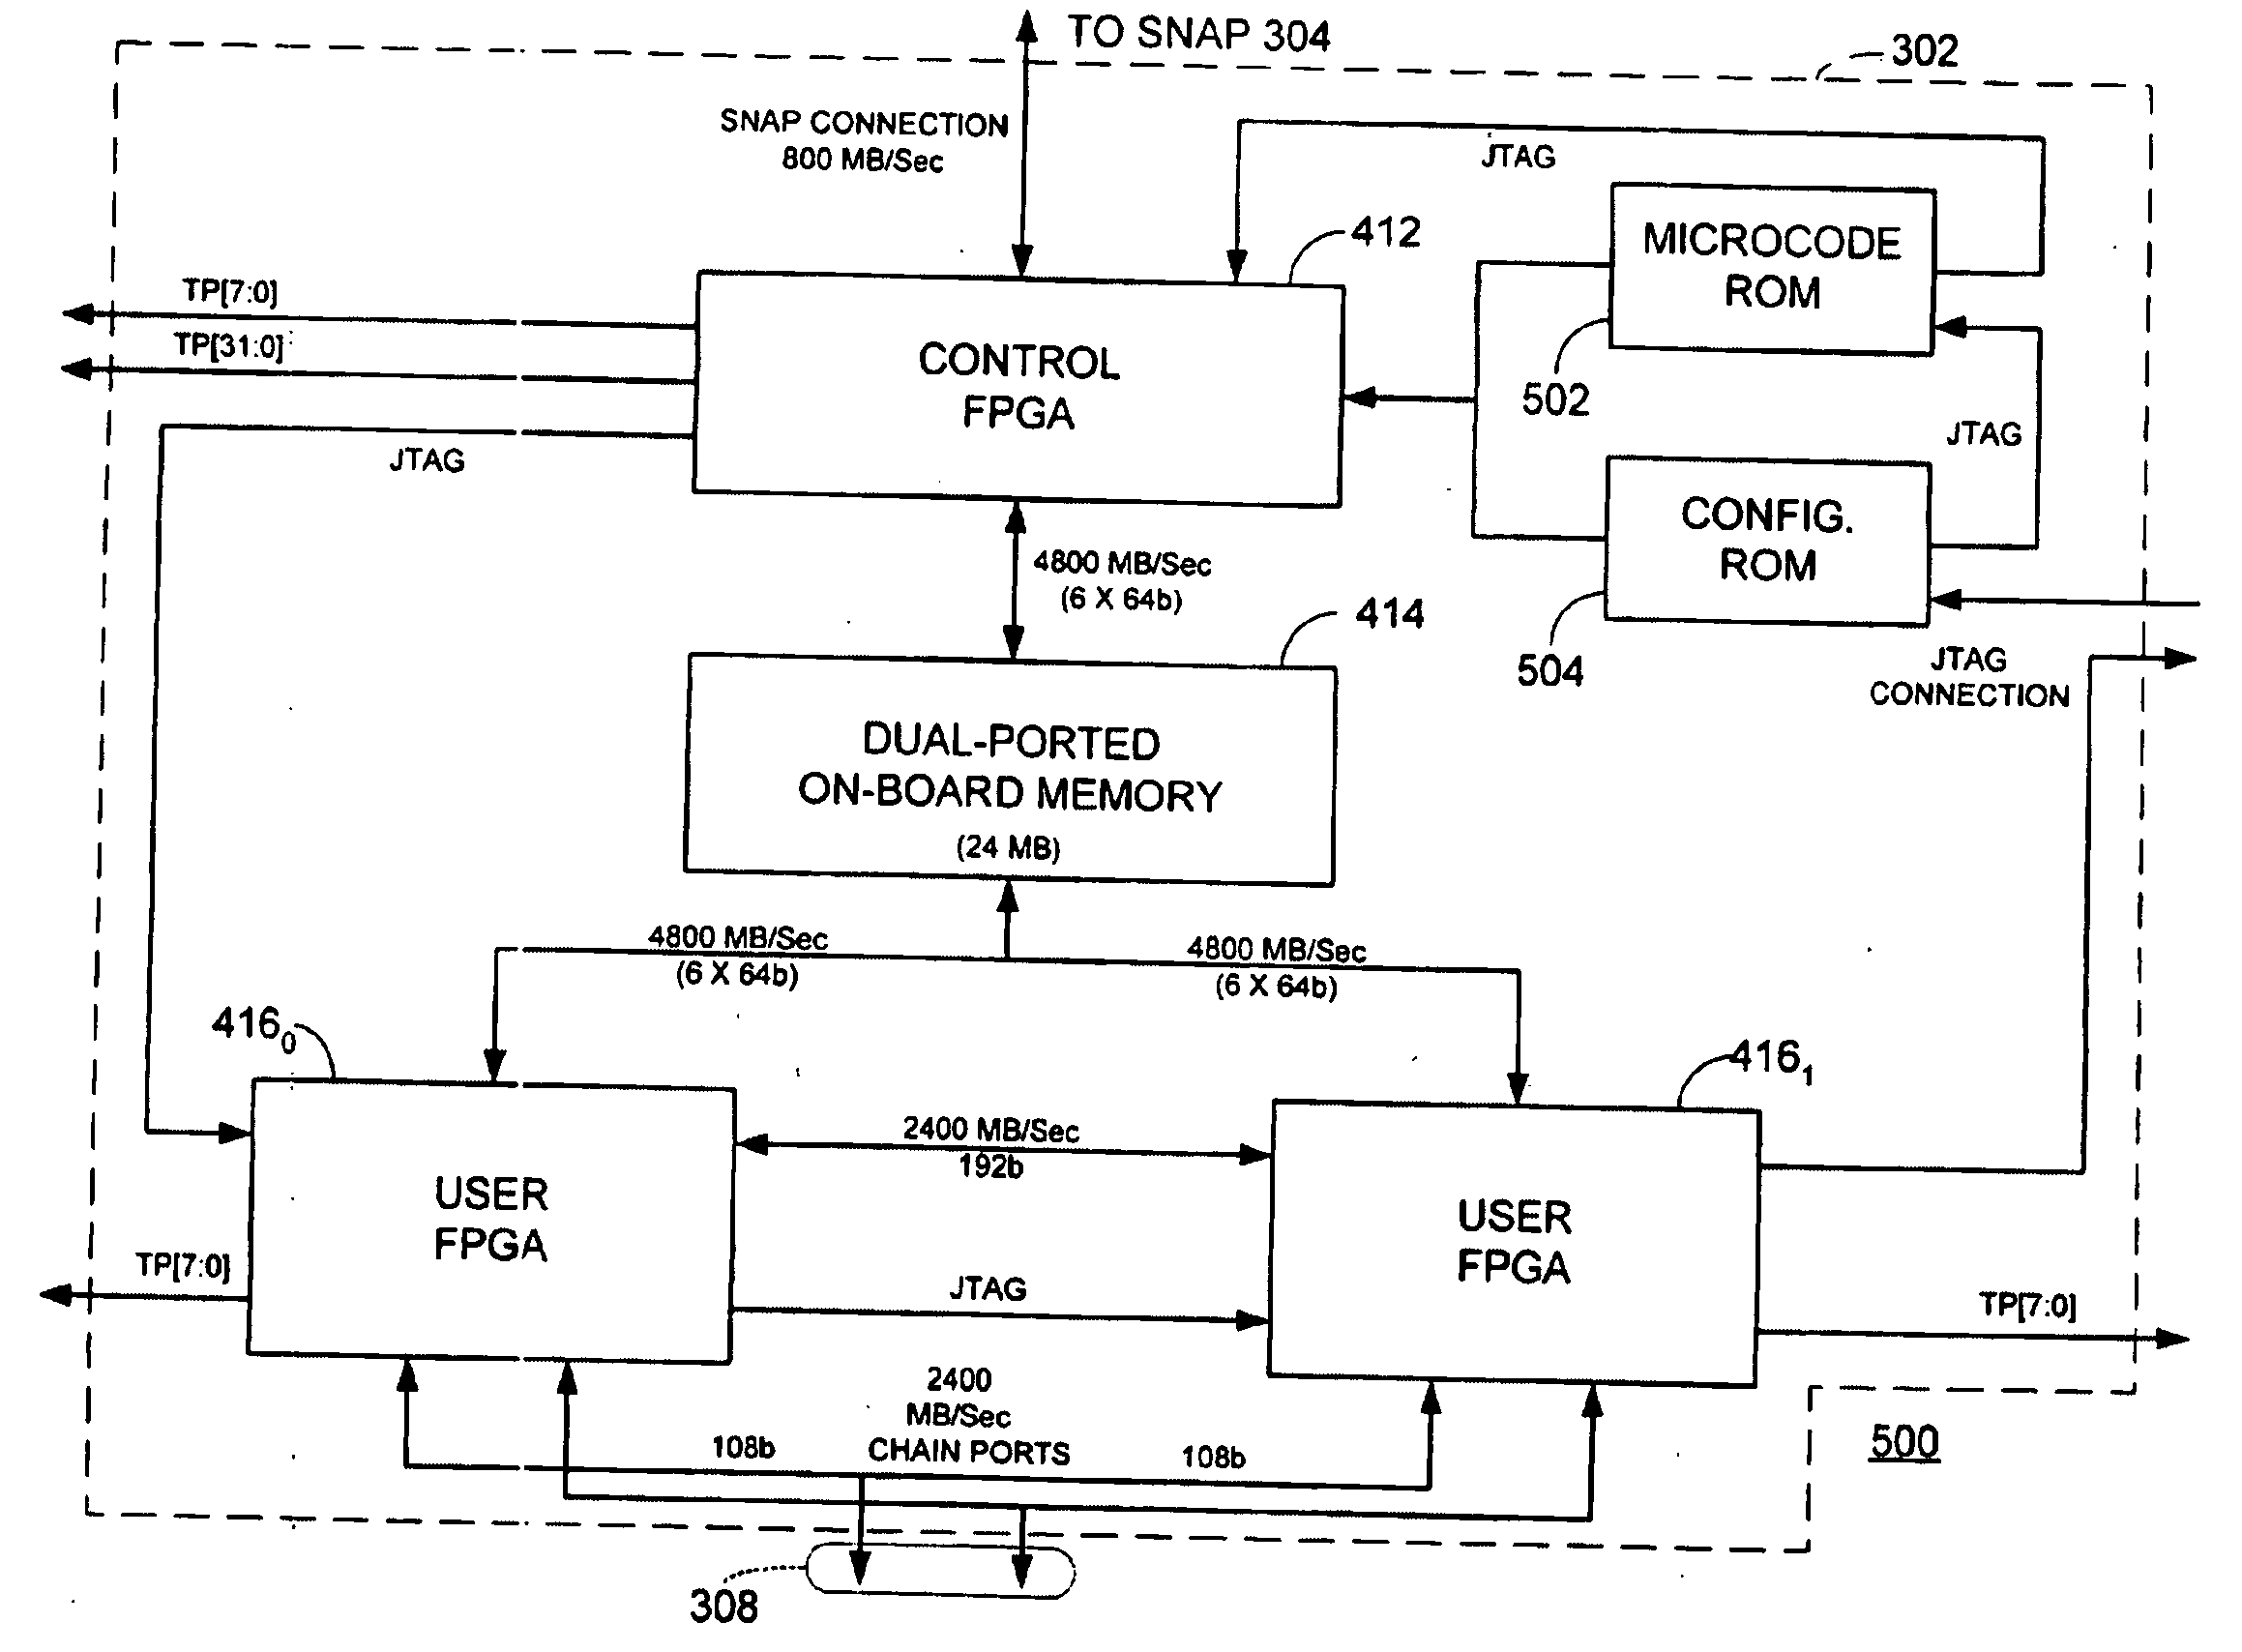 Switch/network adapter port coupling a reconfigurable processing element to one or more microprocessors for use with interleaved memory controllers